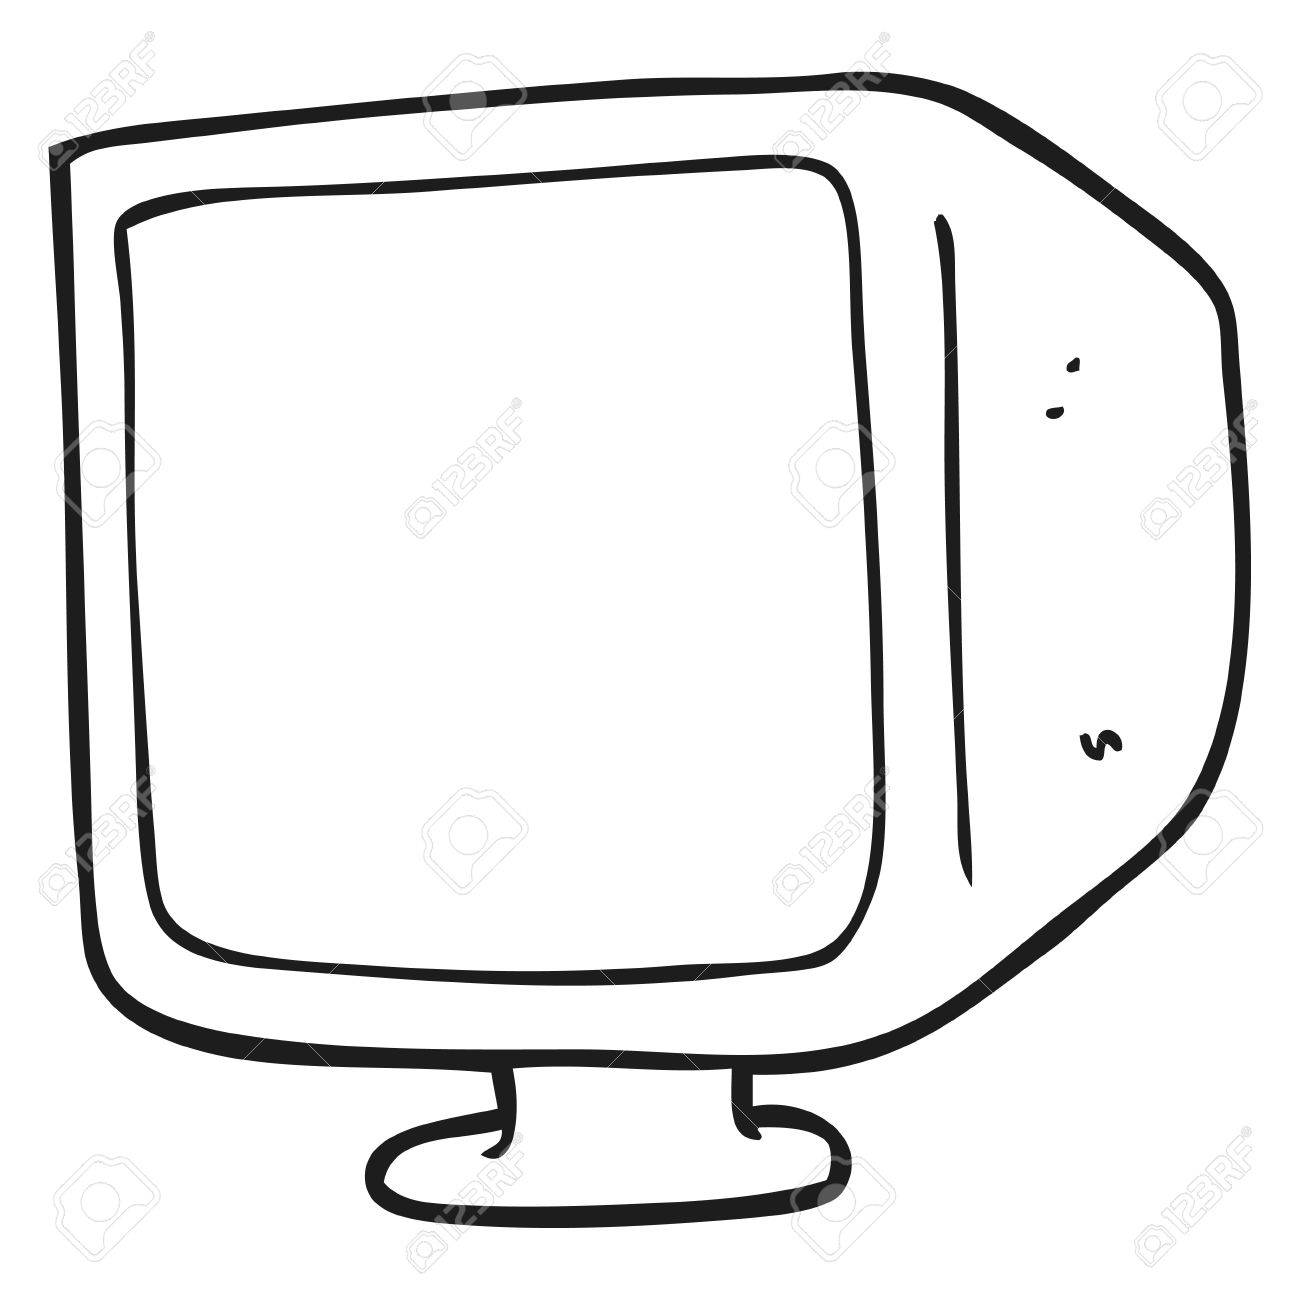 freehand drawn black and white cartoon old computer monitor.